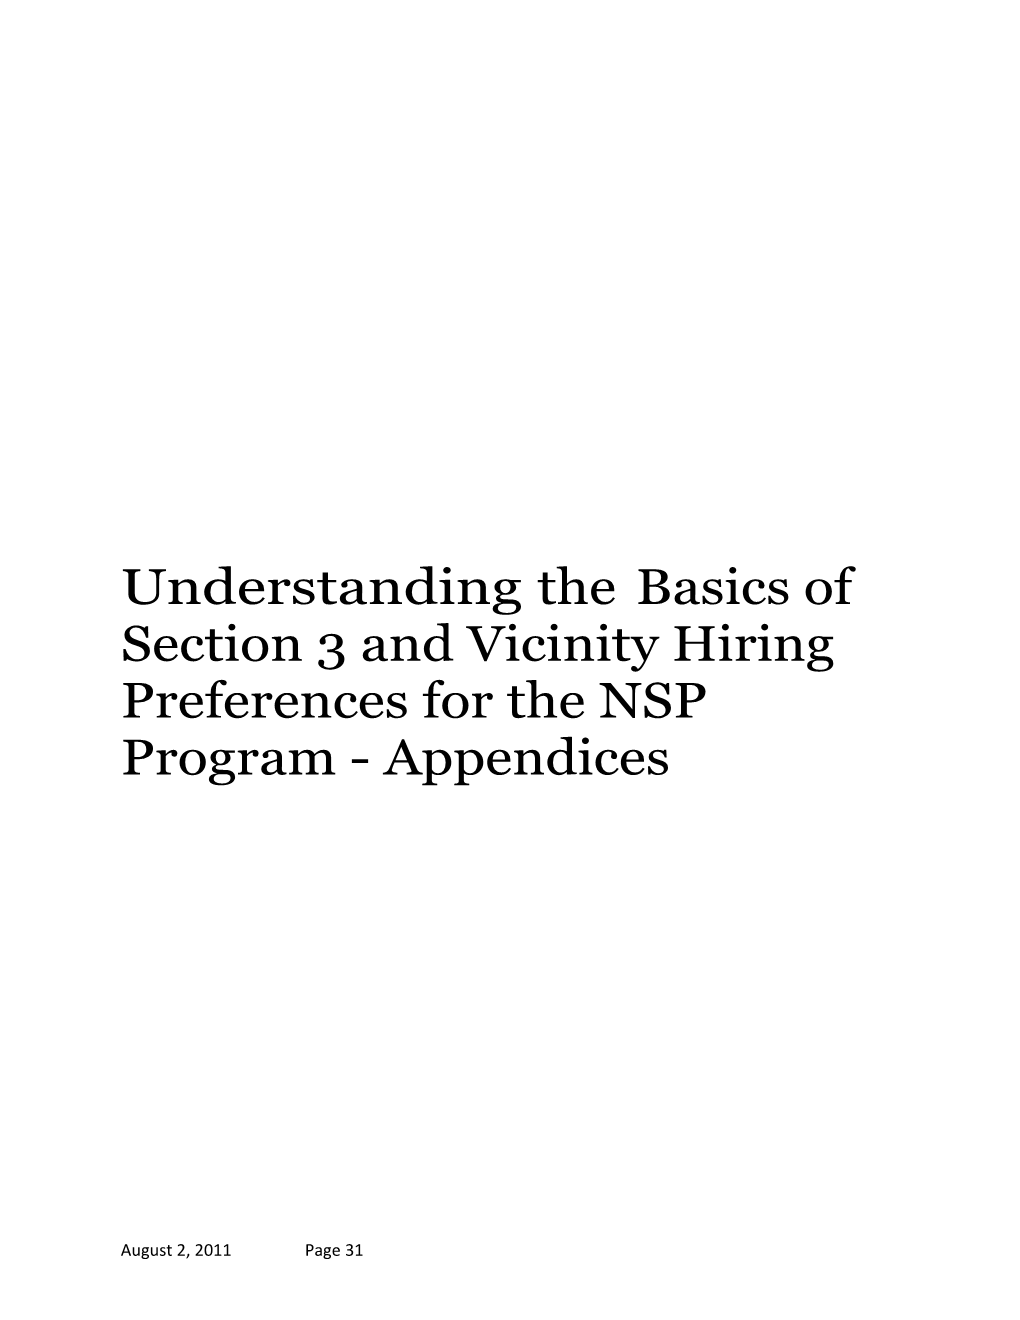 Understanding the Basics of Section 3 and Vicinity Hiring Preferences for the NSP Program